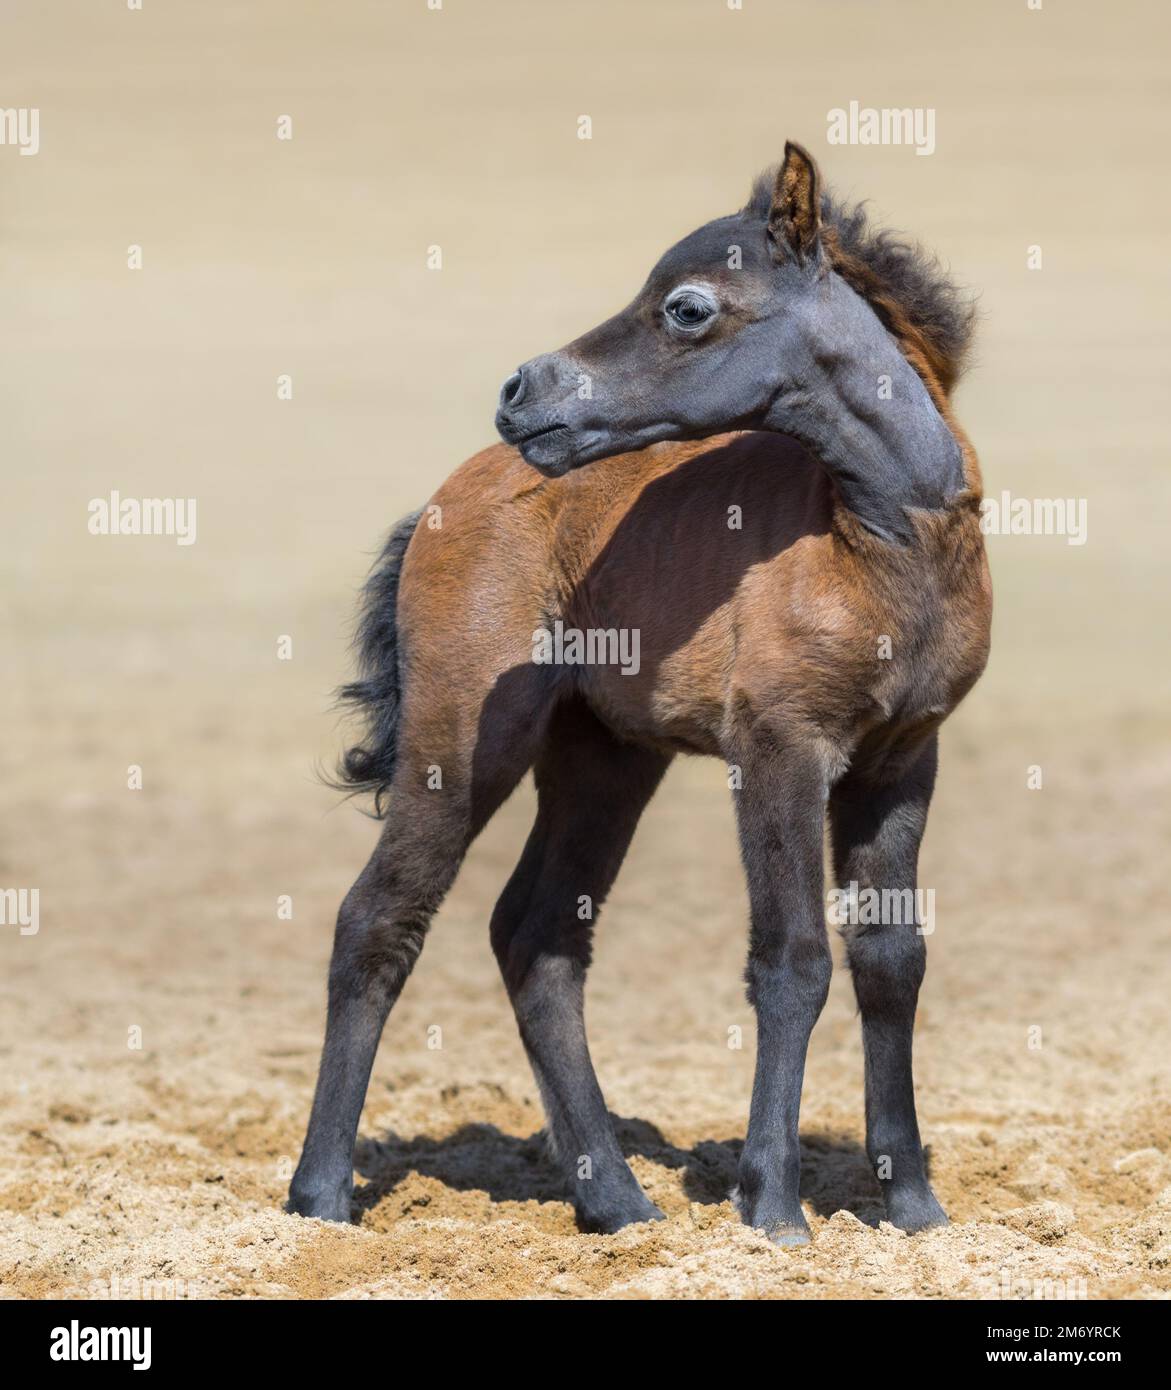 American miniature bay foal stands on sand and turned its head away. Vertical composition. Stock Photo